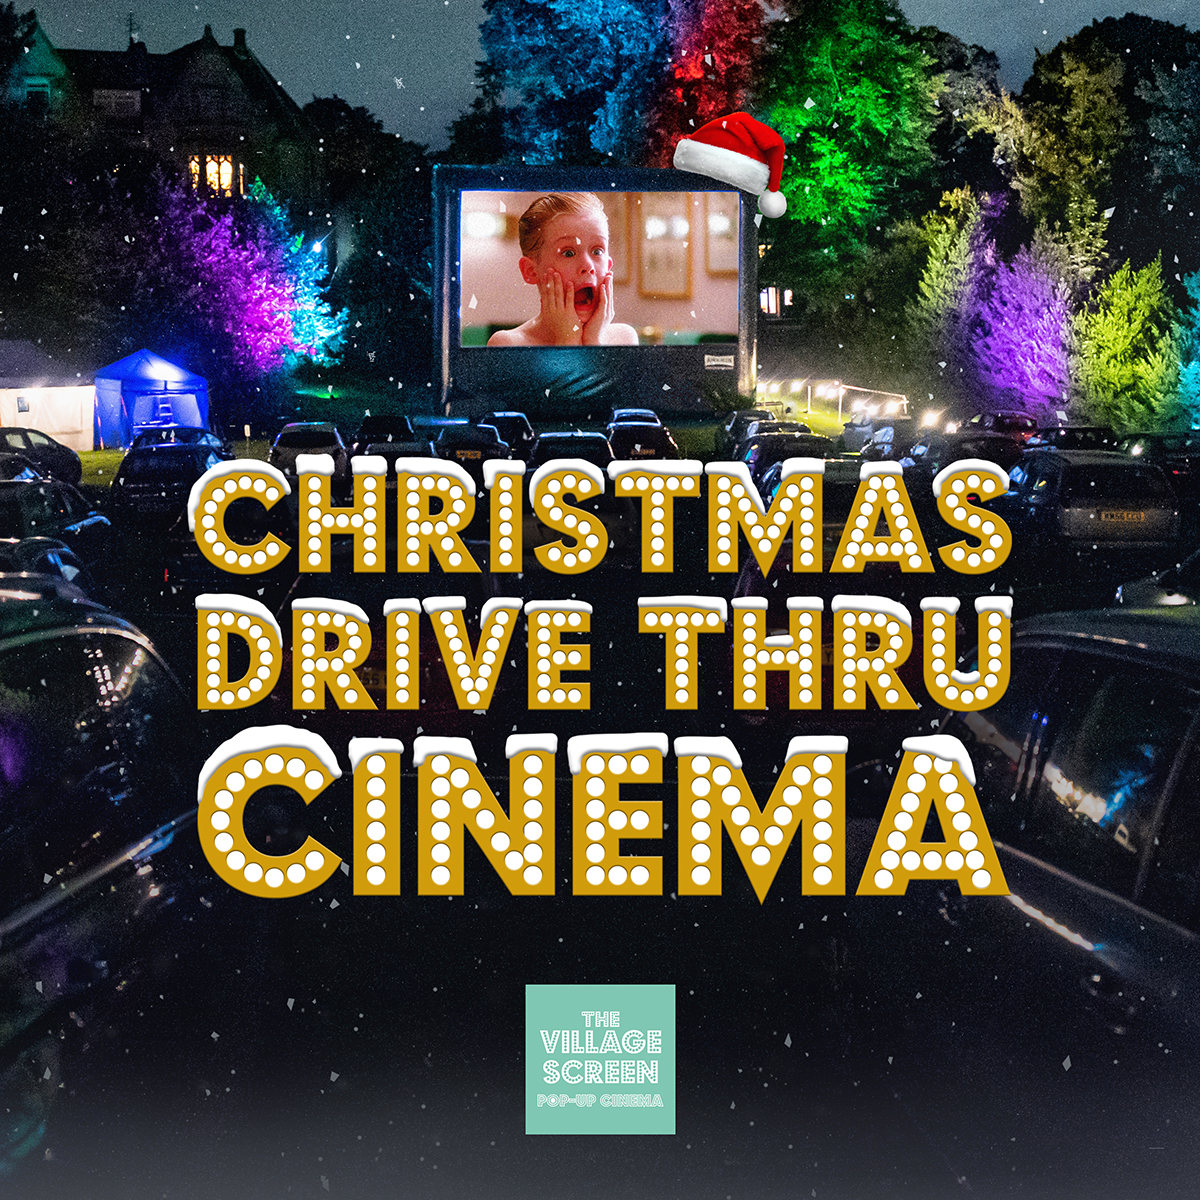 Drive Thru Cinema is coming to Gulliver’s Valley this Christmas!